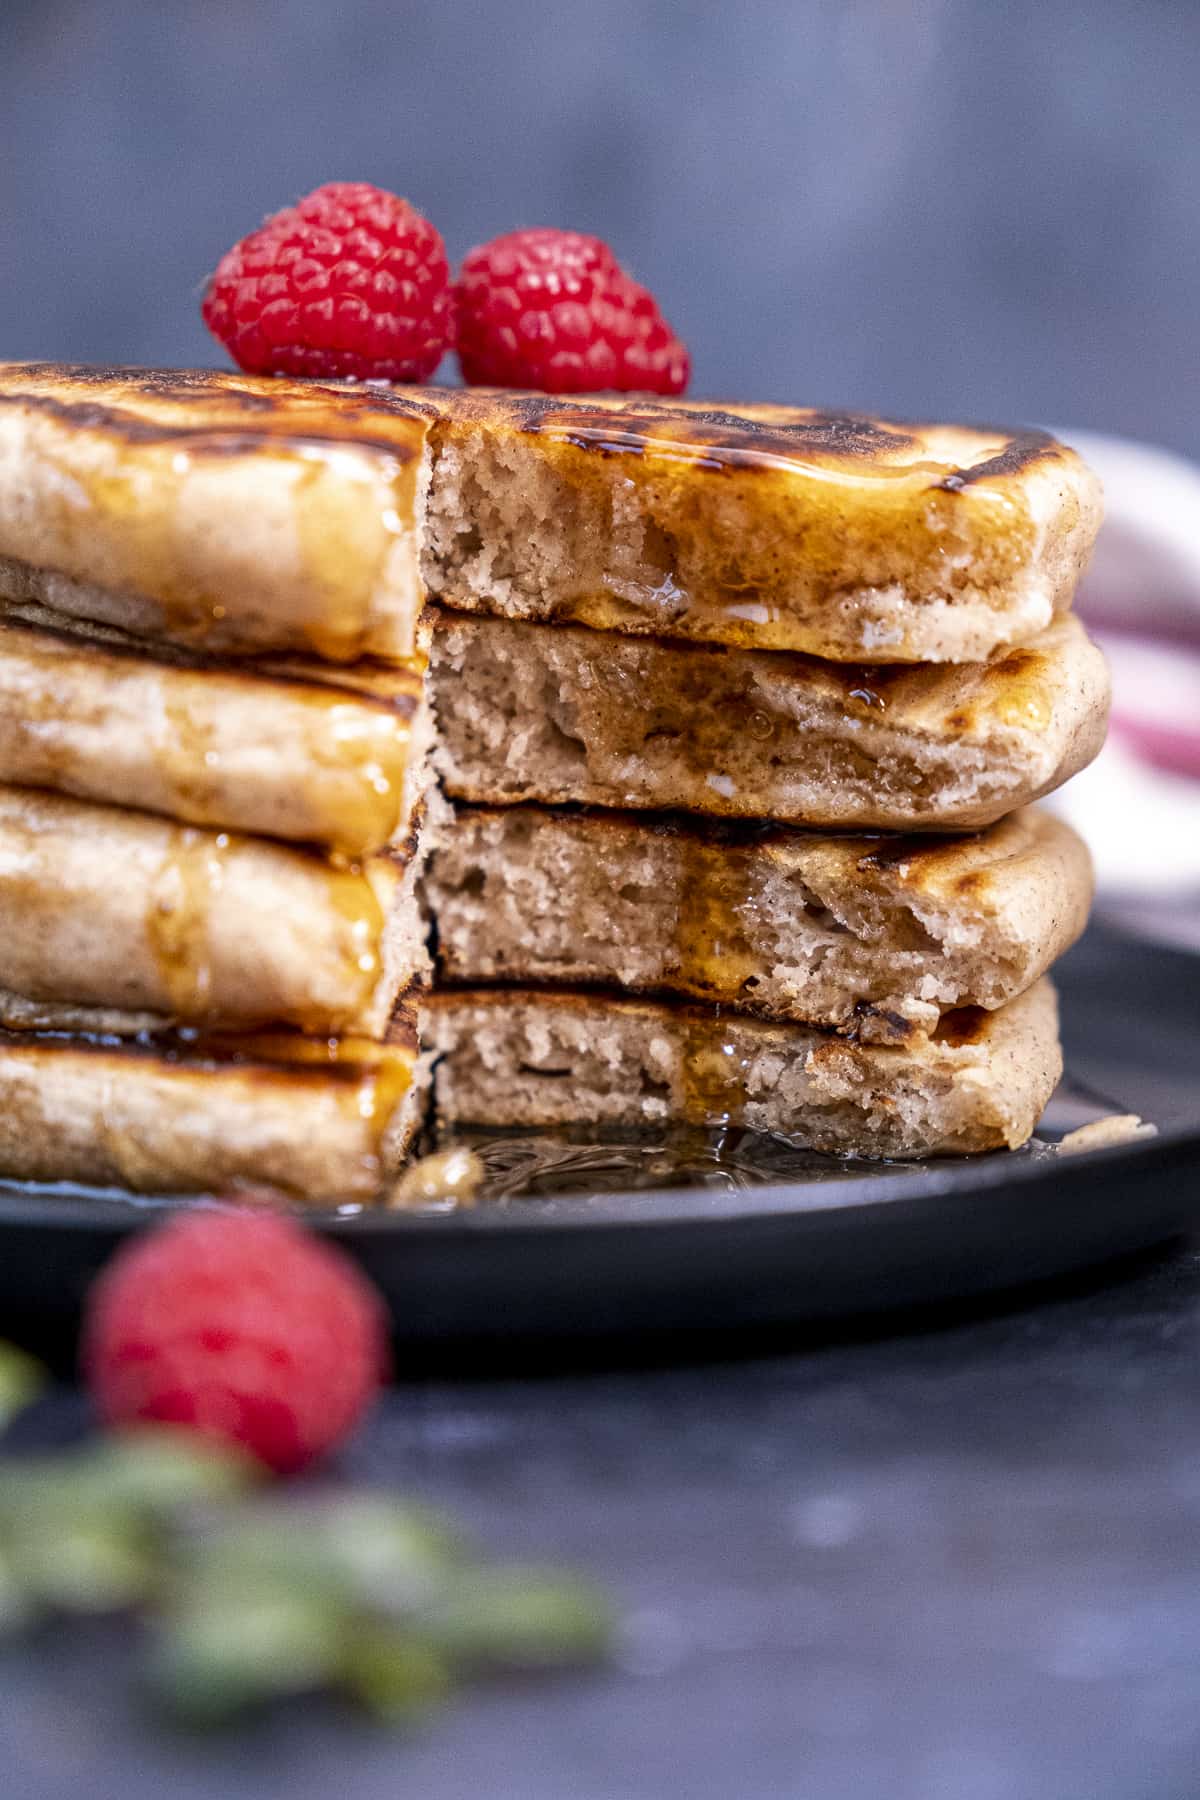 Fluffy pancakes sliced, drizzled with maple syrup and topped with raspberries on a black plate.